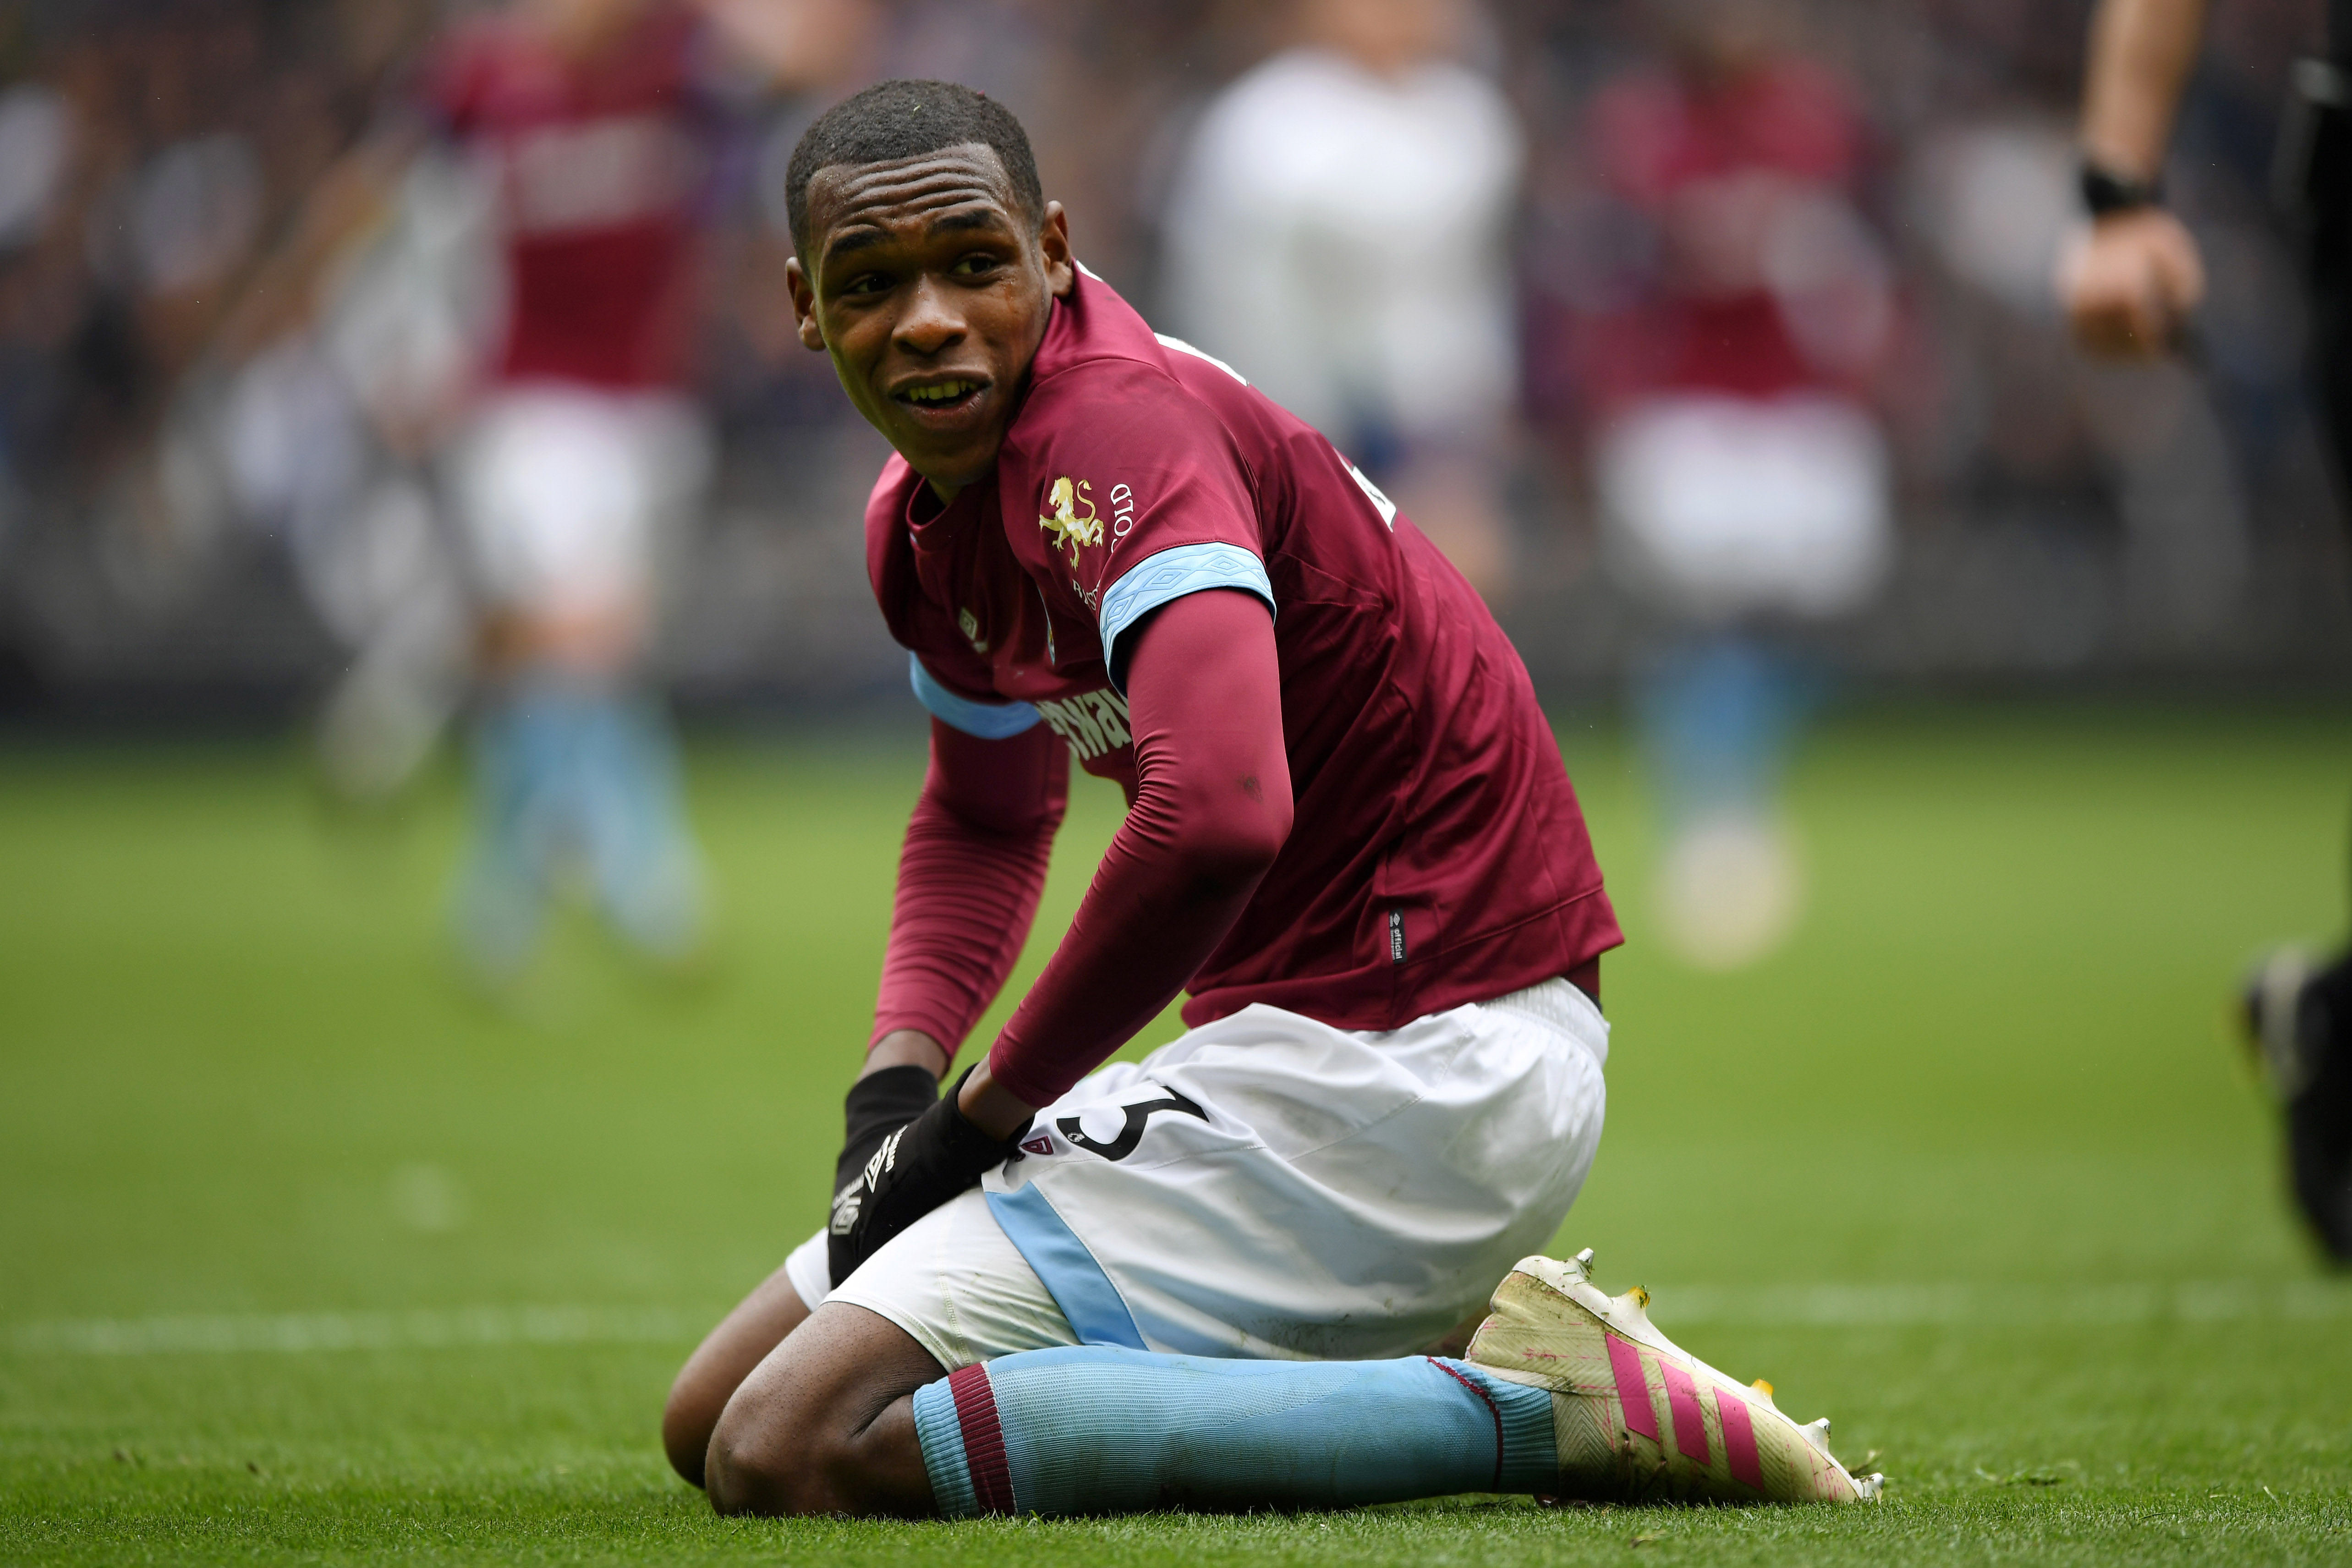 LONDON, ENGLAND - APRIL 27:  Issa Diop of West Ham United reacts during the Premier League match between Tottenham Hotspur and West Ham United at Tottenham Hotspur Stadium on April 27, 2019 in London, United Kingdom. (Photo by Shaun Botterill/Getty Images)